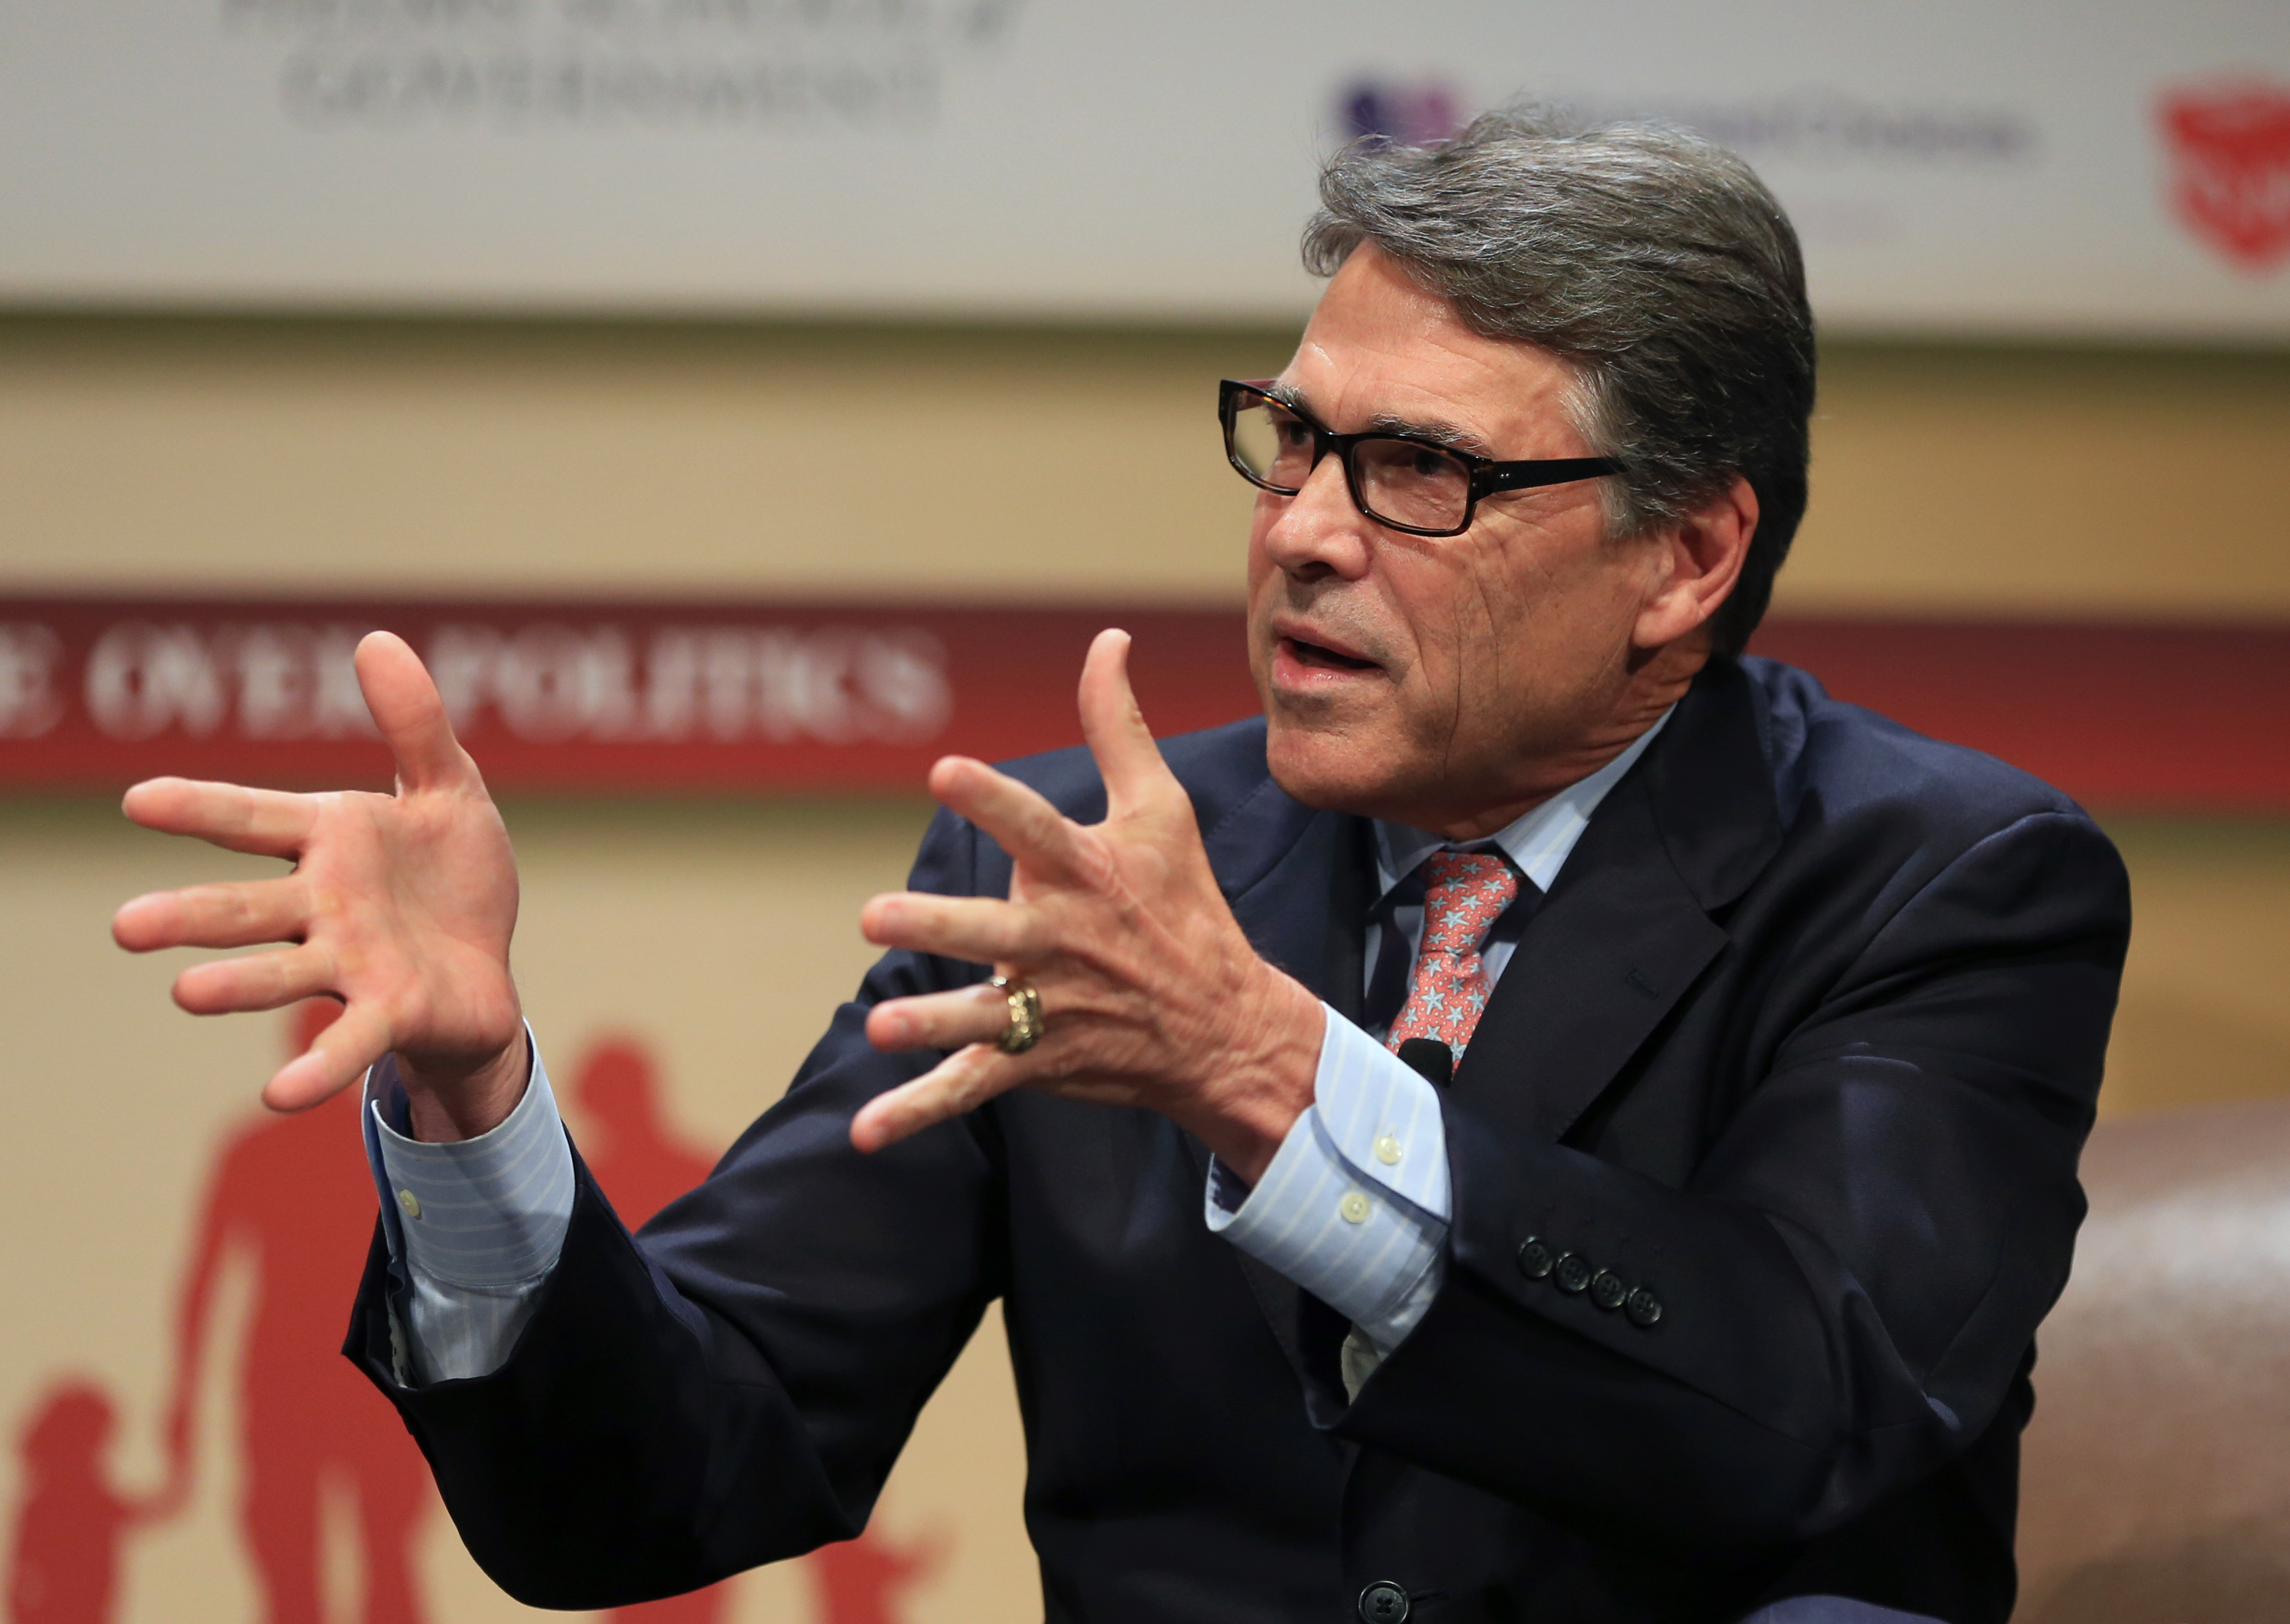 Republican presidential candidate, former Texas Gov. Rick Perry, speaks at the Family Leadership Summit in Ames, Iowa on July 18, 2015. (Nati Harnik—AP)